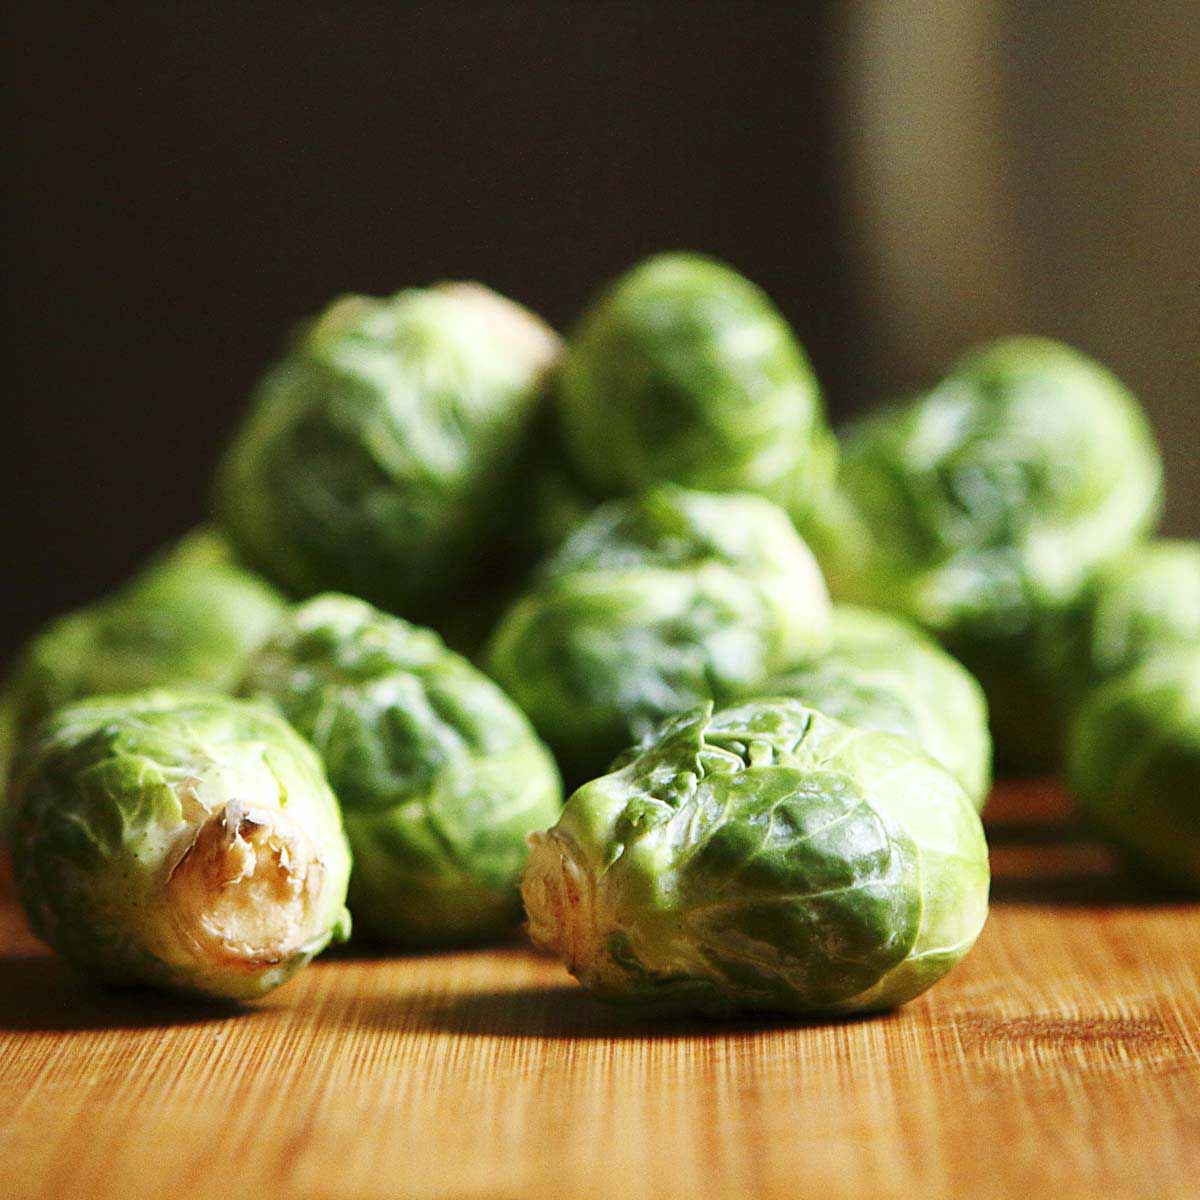 Brussel Sprouts tumble over counter top.